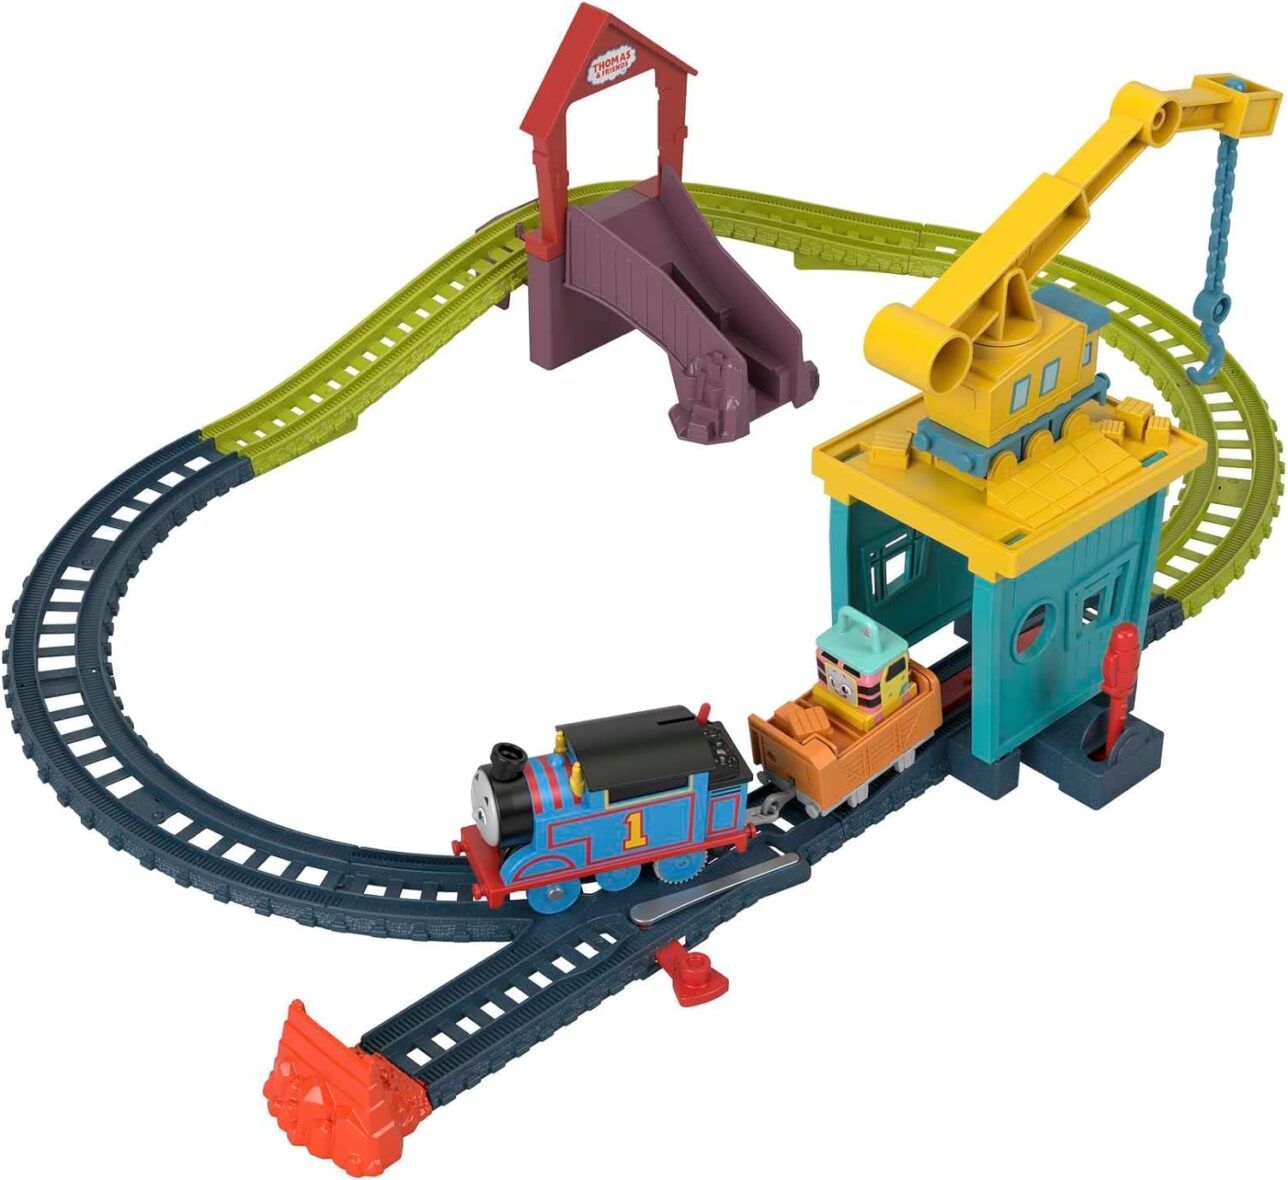 Thomas & Friends Motorized Toy Train Set Fix ‘Em Up Friends With Carly The Crane, Sandy The Rail Speeder & Thomas For Ages 3+ Years